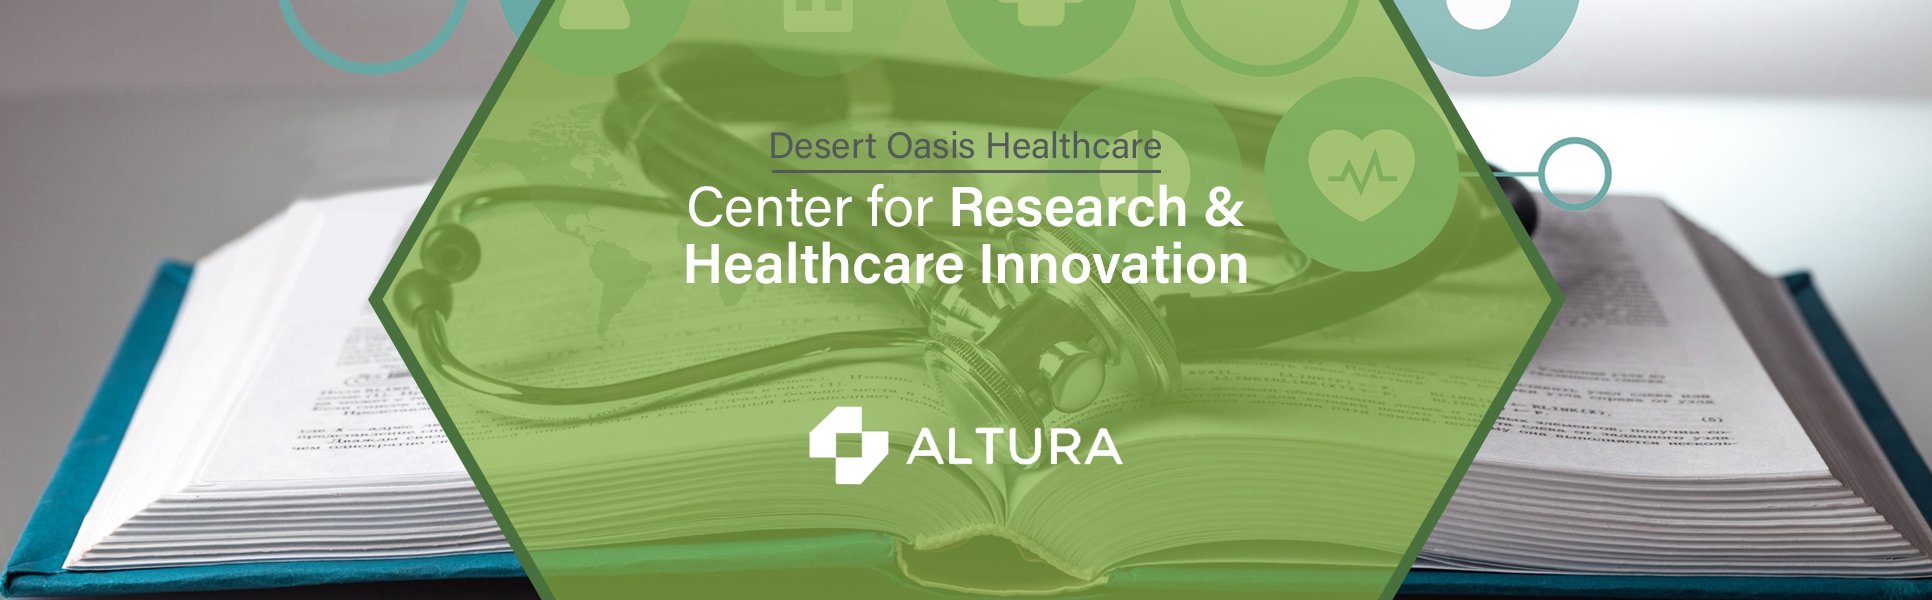 DOHC Center for Research and Healthcare Innovation | Altura | DOHC